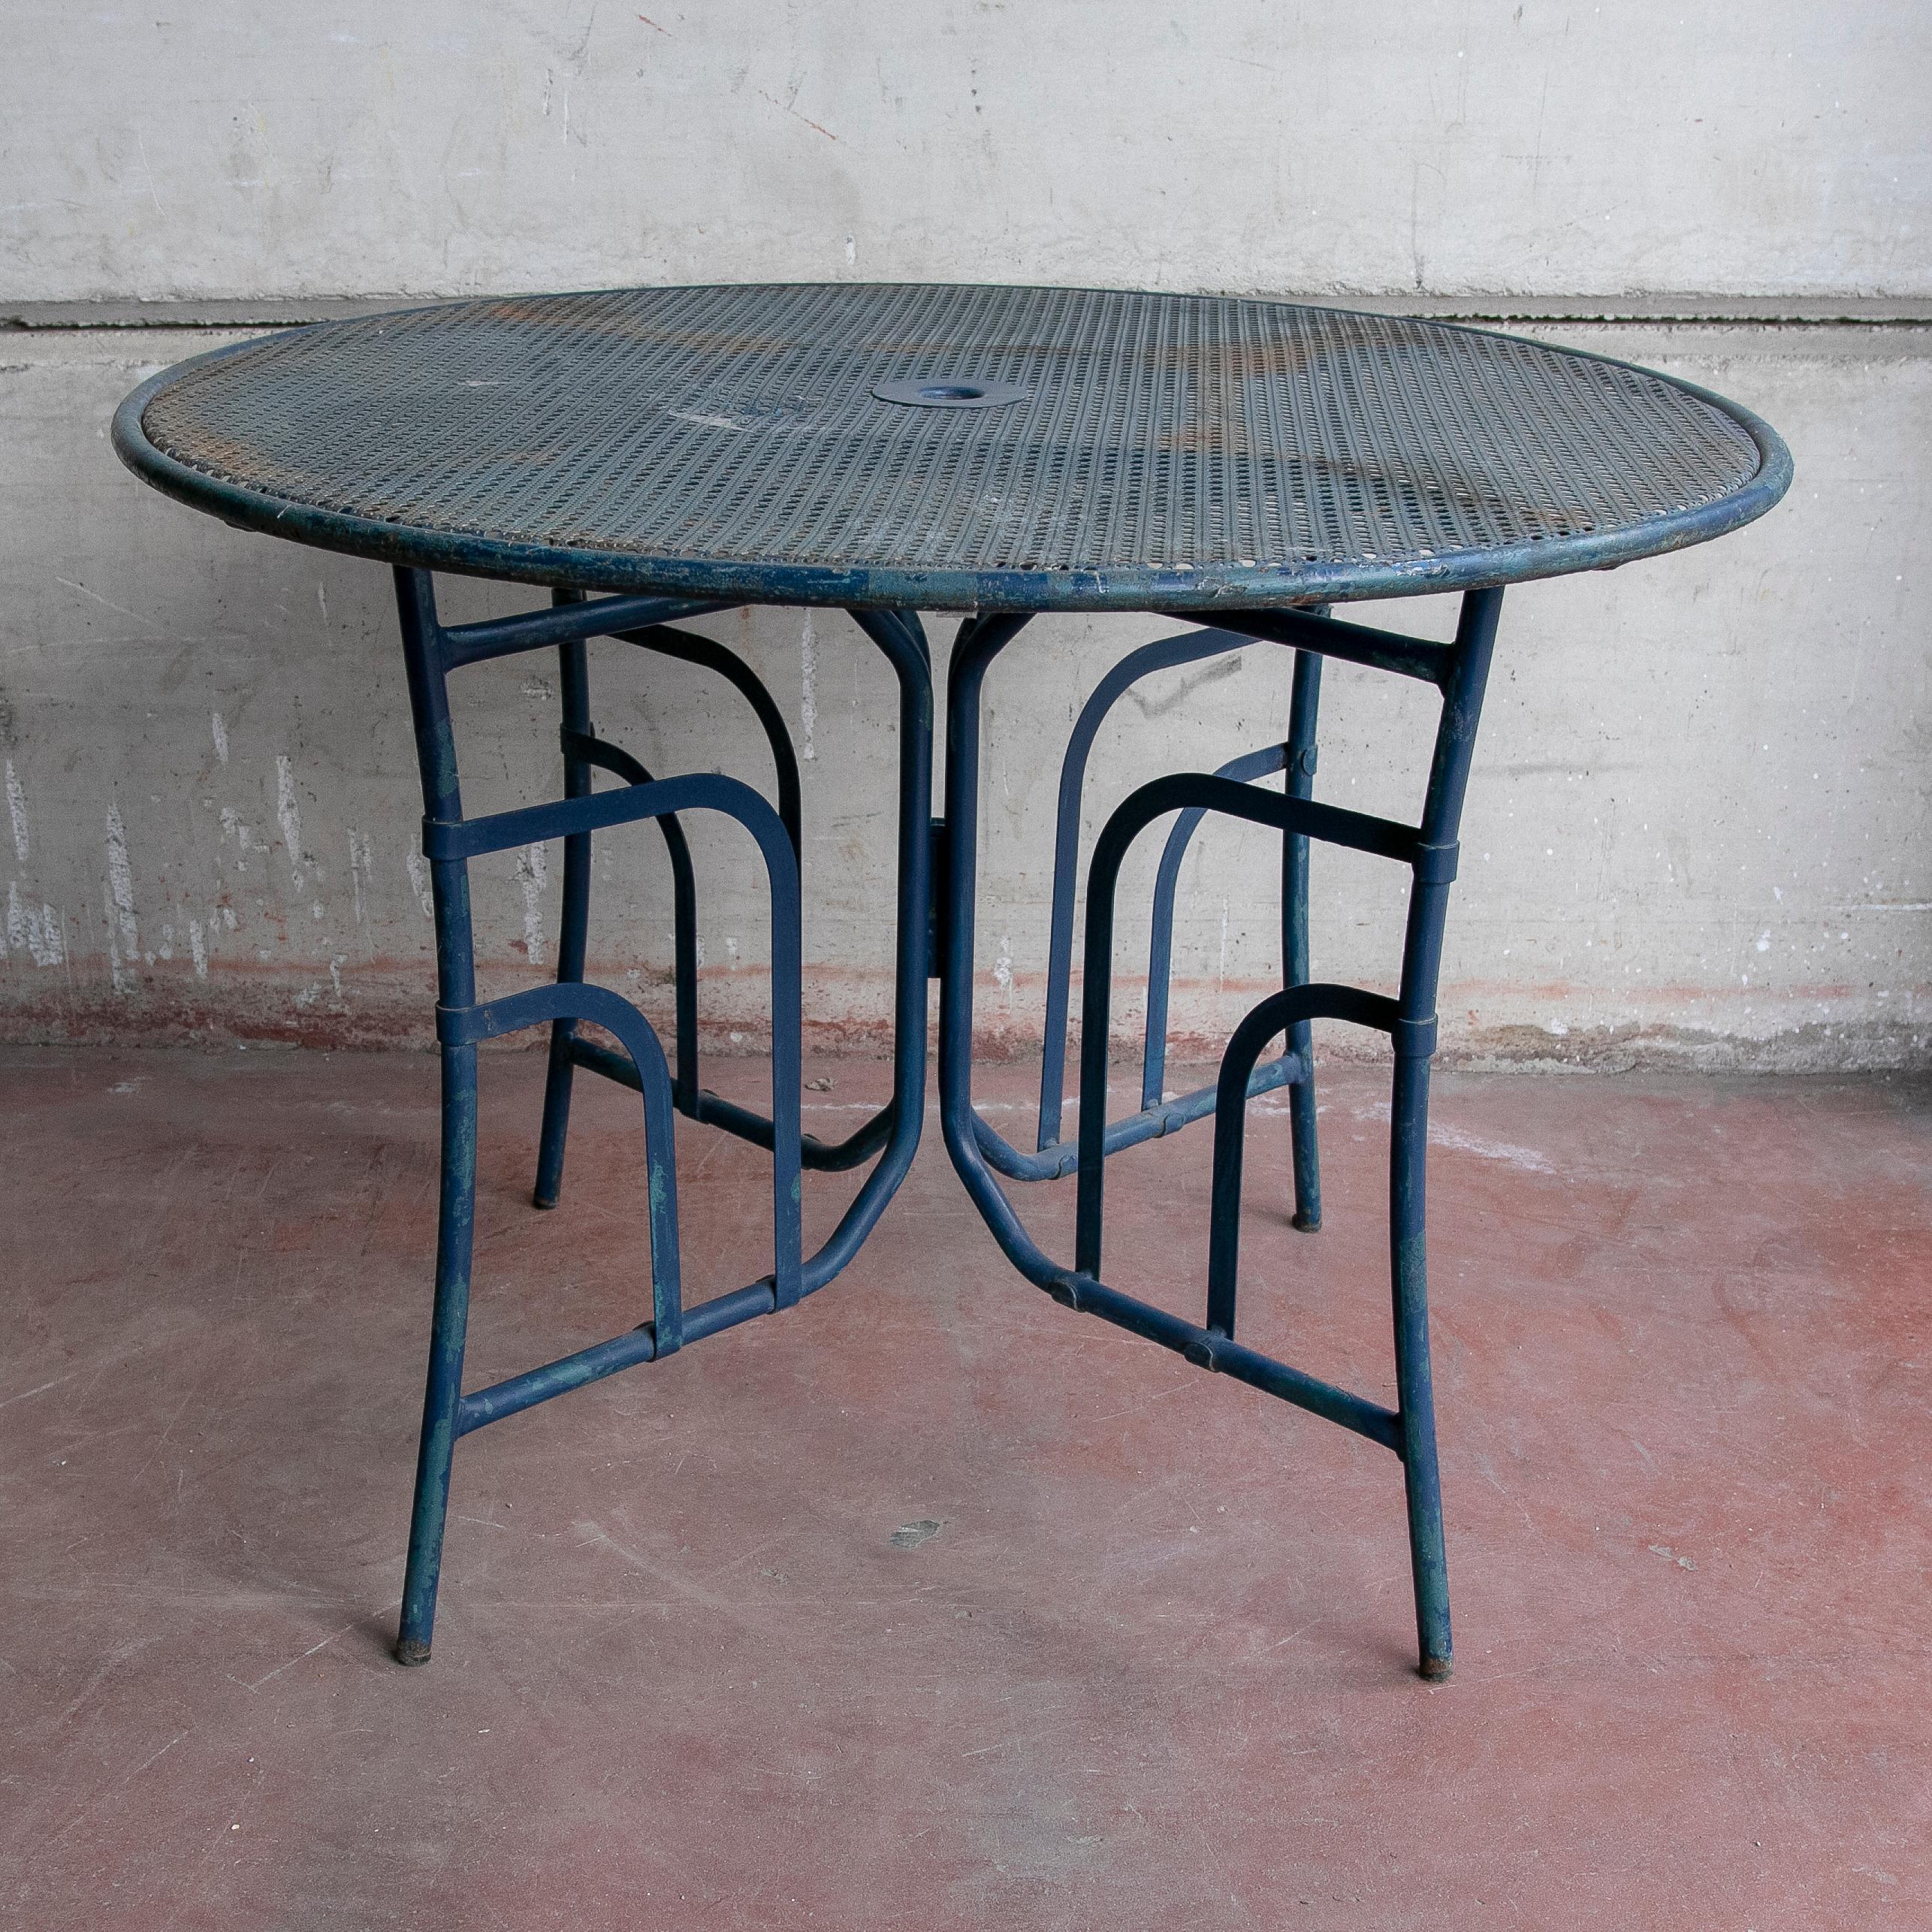 1980s Iron Garden Table painted in blue colour.